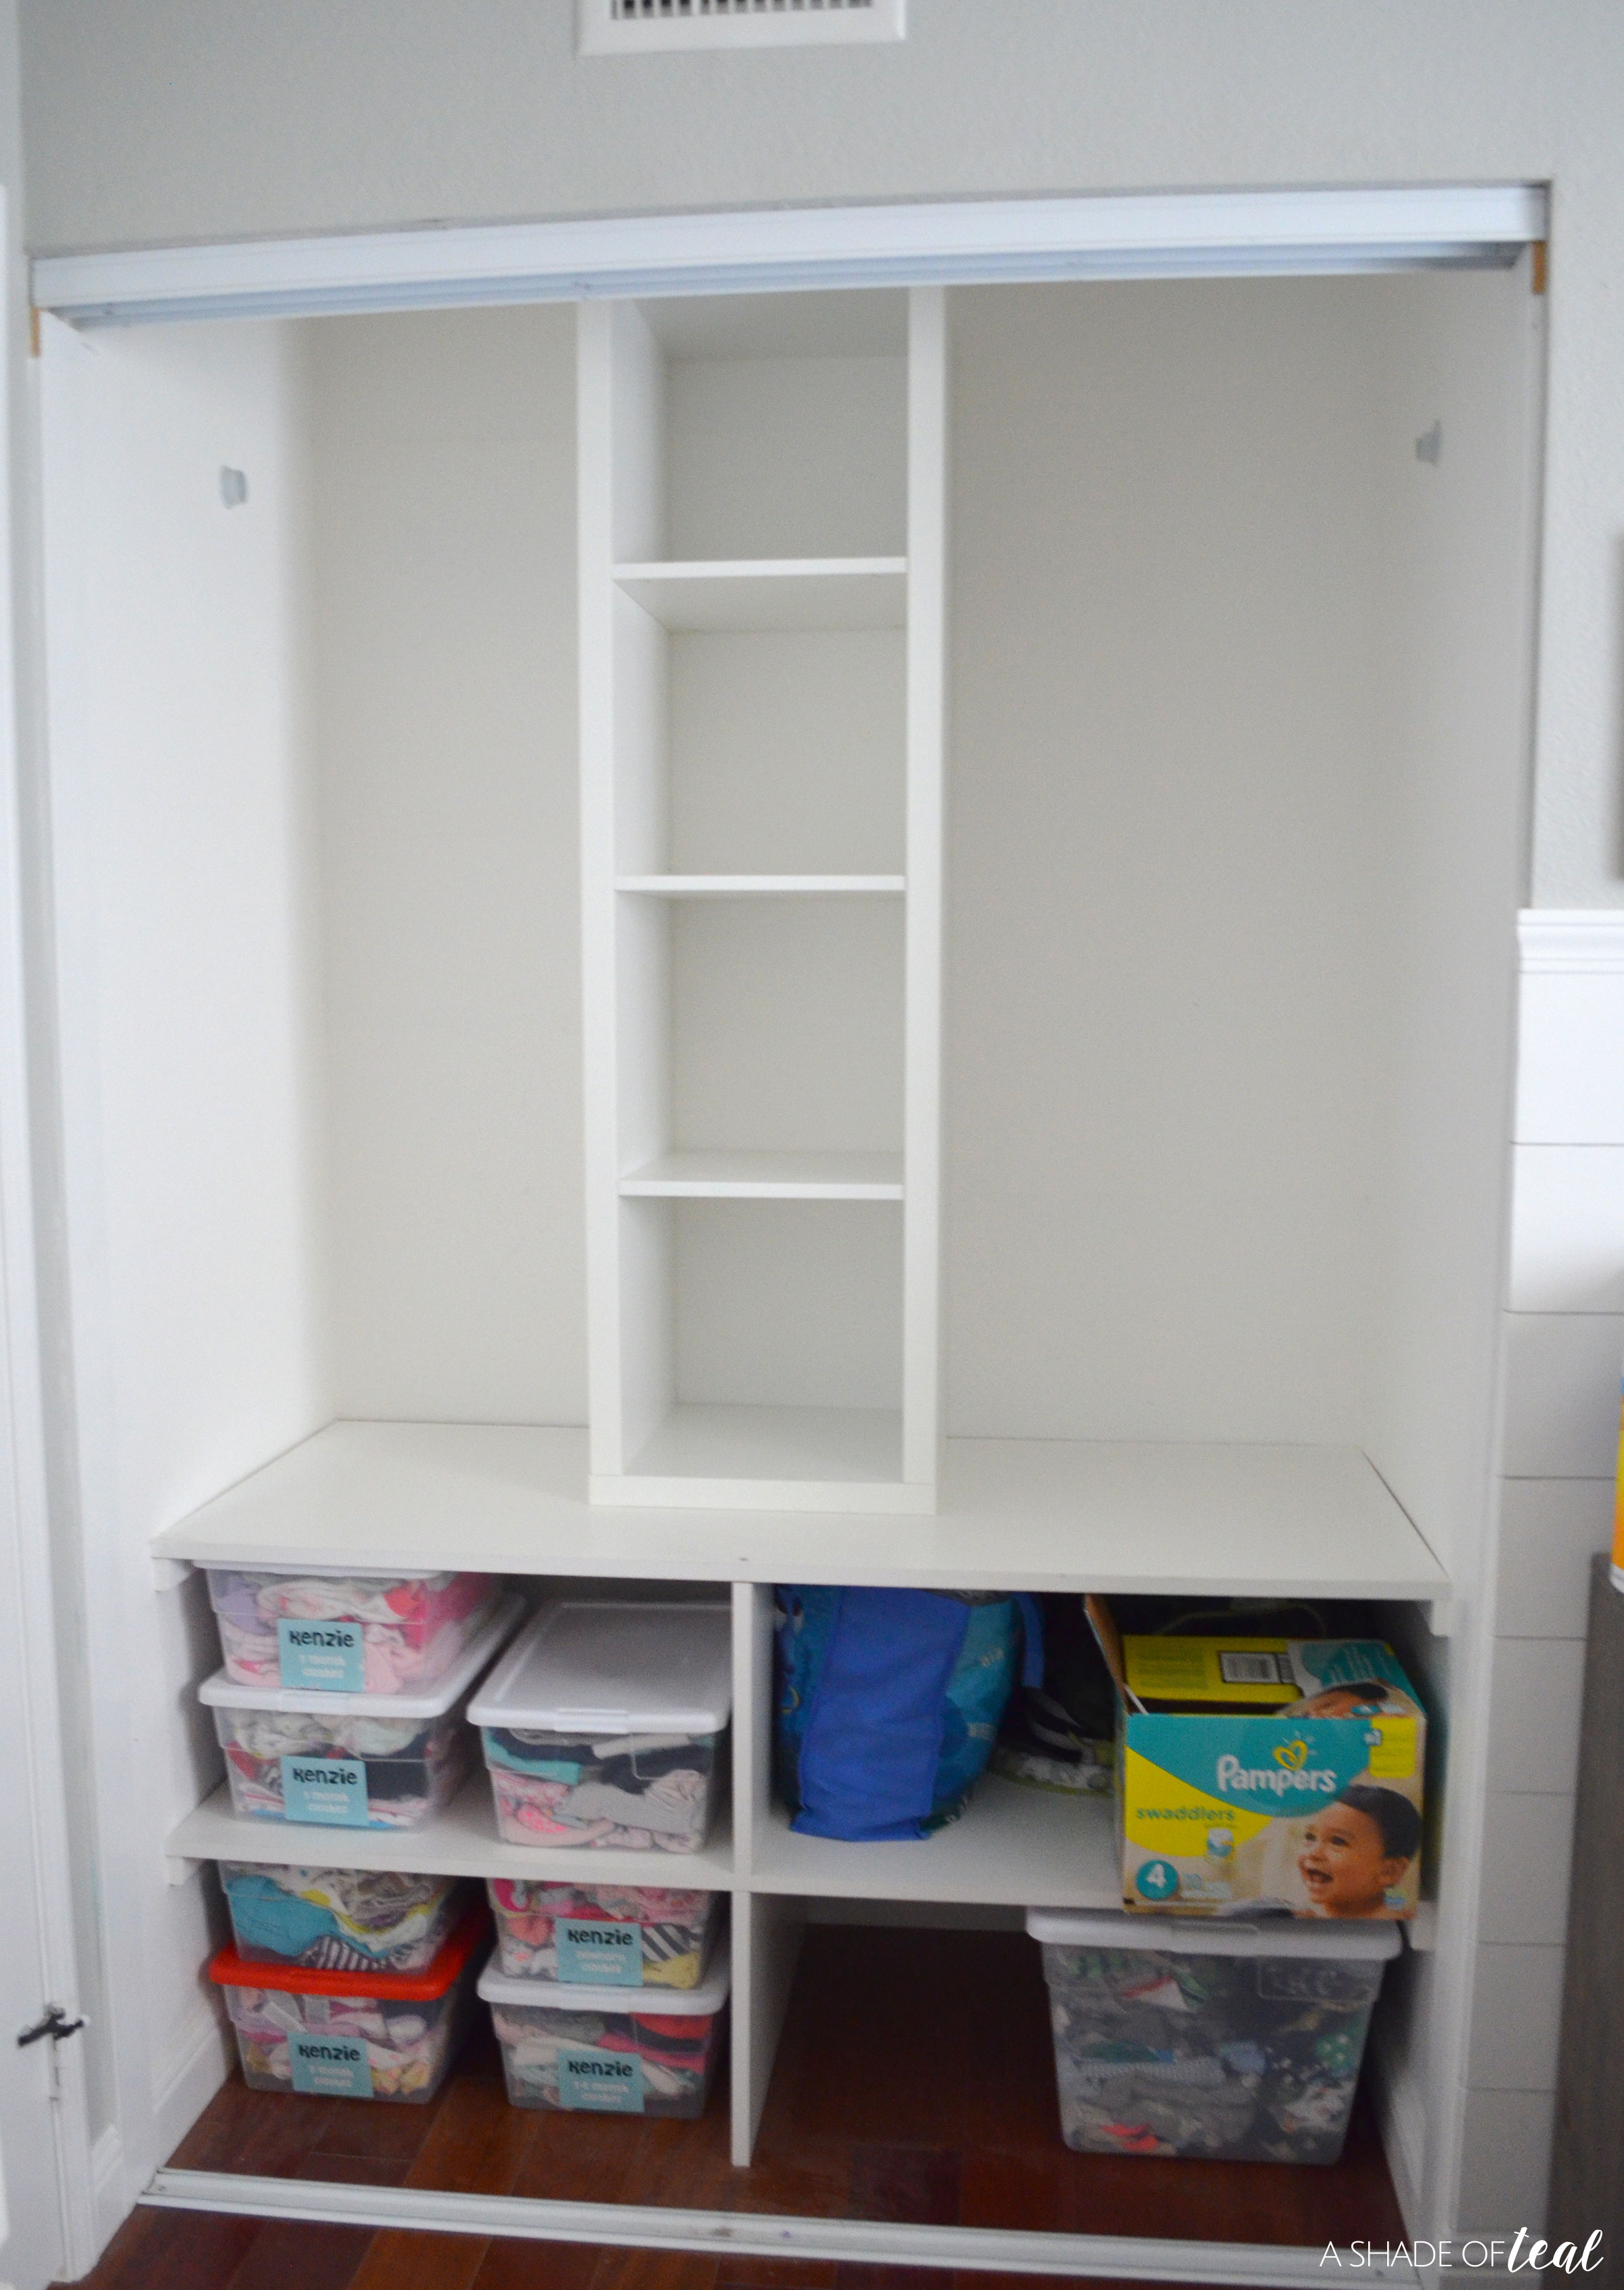 By removing the hanger rod and adding a cube storage bench, hooks and a  shelf, this tiny closet …